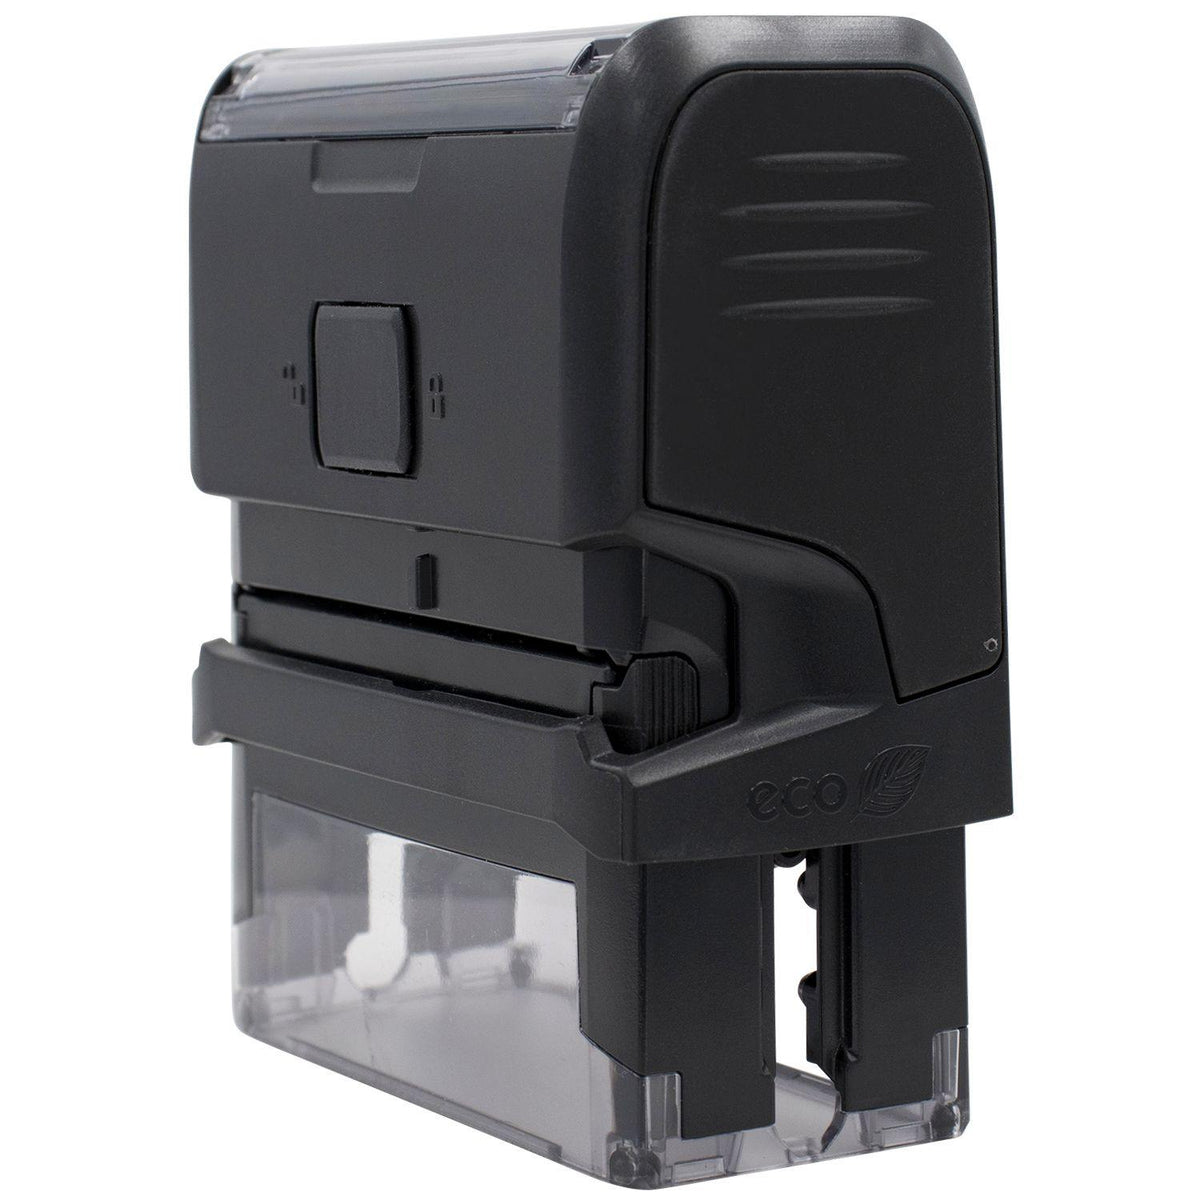 Self-Inking Terrific Effort Stamp - Engineer Seal Stamps - Brand_Trodat, Impression Size_Small, Stamp Type_Self-Inking Stamp, Type of Use_Teacher